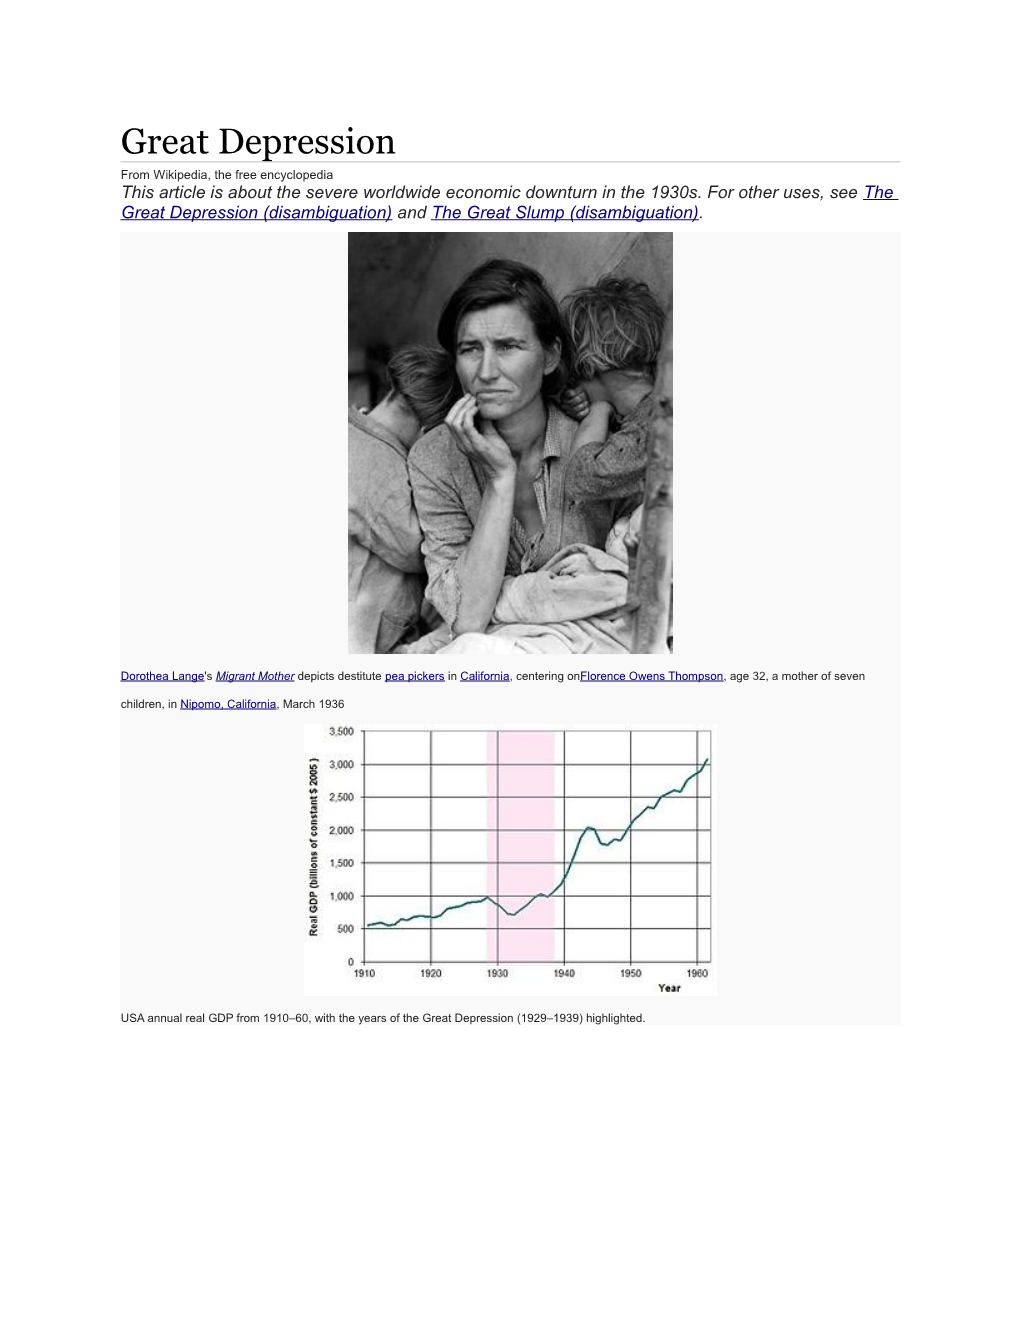 Great Depression from Wikipedia, the Free Encyclopedia This Article Is About the Severe Worldwide Economic Downturn in the 1930S